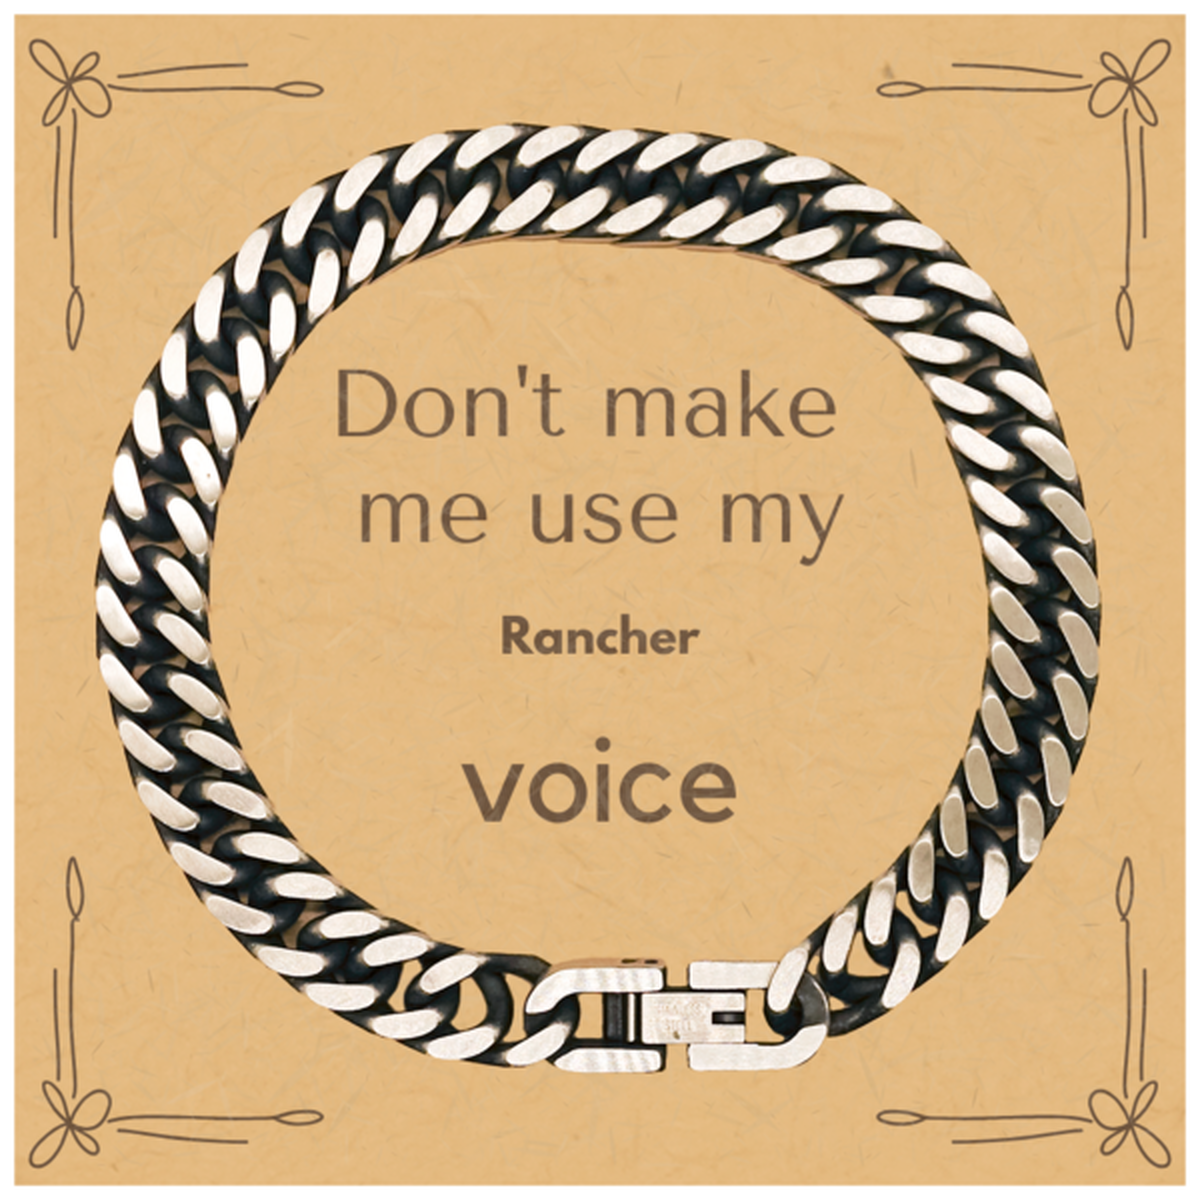 Don't make me use my Rancher voice, Sarcasm Rancher Card Gifts, Christmas Rancher Cuban Link Chain Bracelet Birthday Unique Gifts For Rancher Coworkers, Men, Women, Colleague, Friends